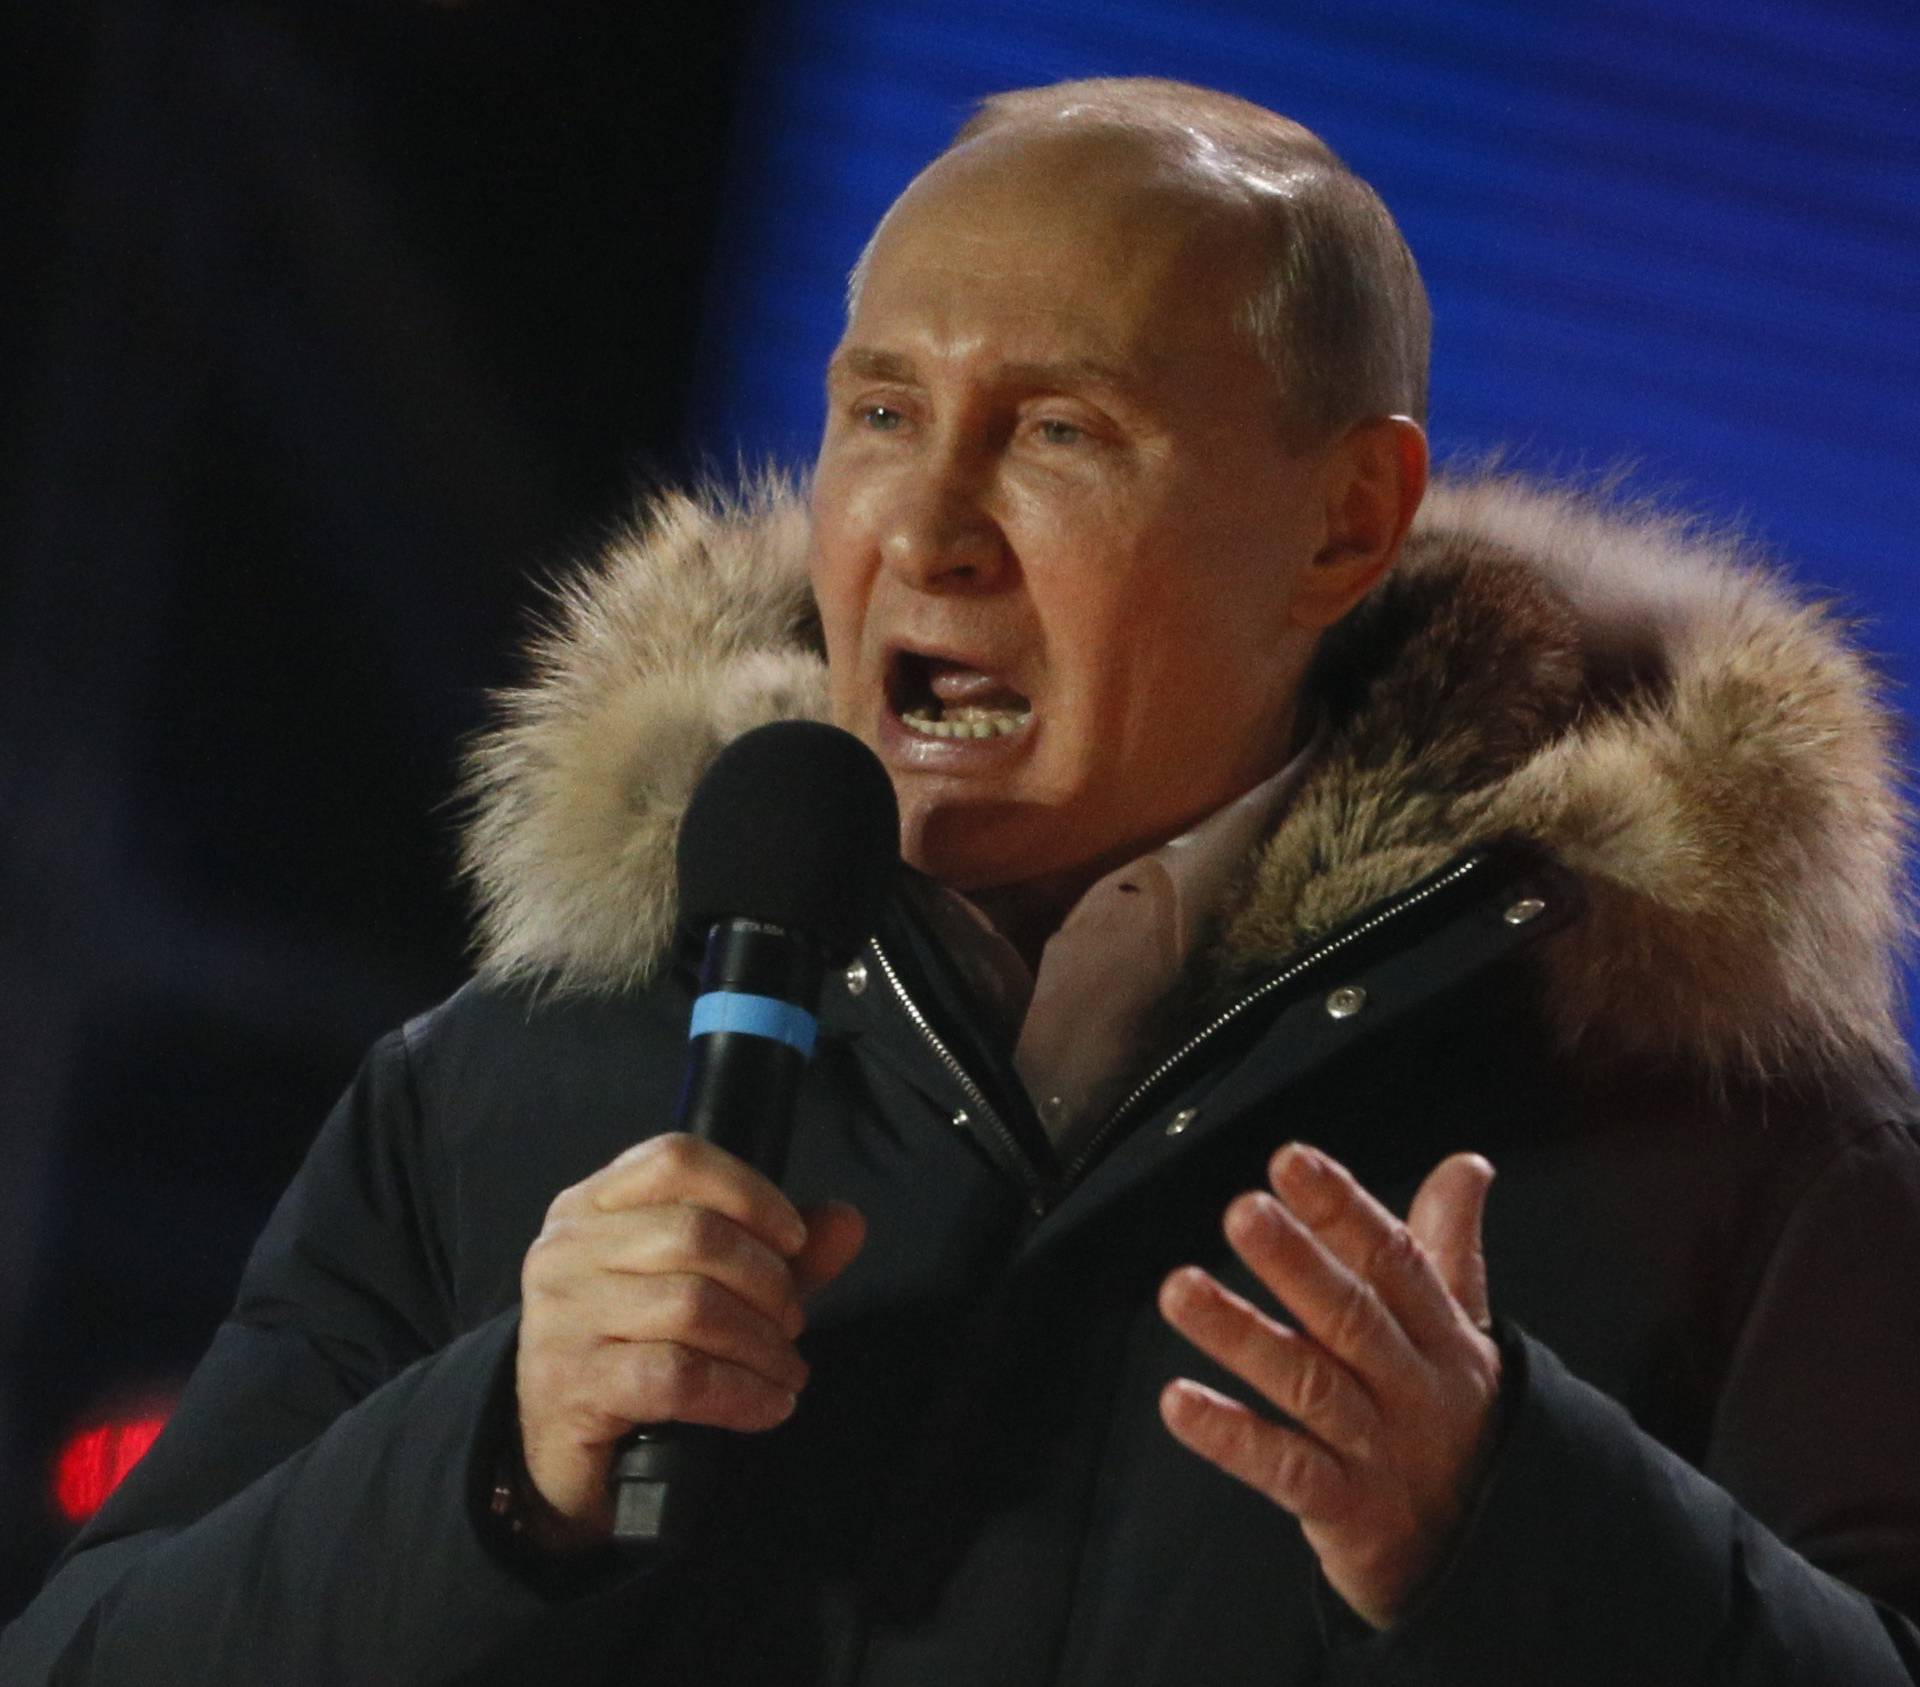 Russian President and Presidential candidate Putin delivers a speech during a rally and concert marking the fourth anniversary of Russia's annexation of the Crimea region, in central Moscow